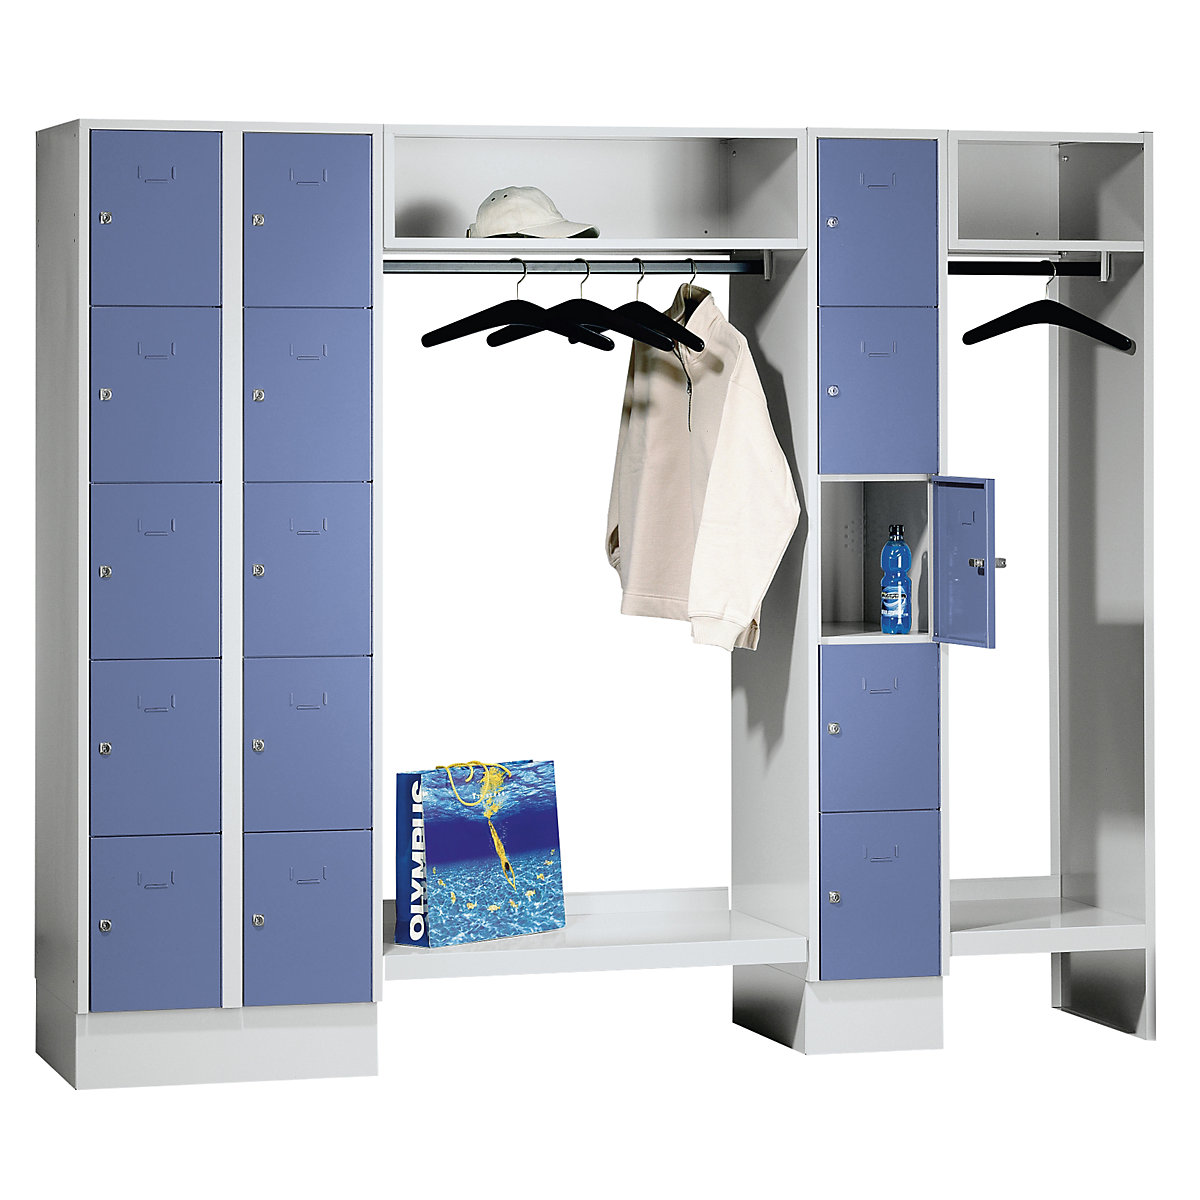 Cloakroom locker system – Wolf, 15 compartments left / centre, 15 coat hangers, overall width 2220 mm, compartment width 298 mm, pigeon blue/light grey-11